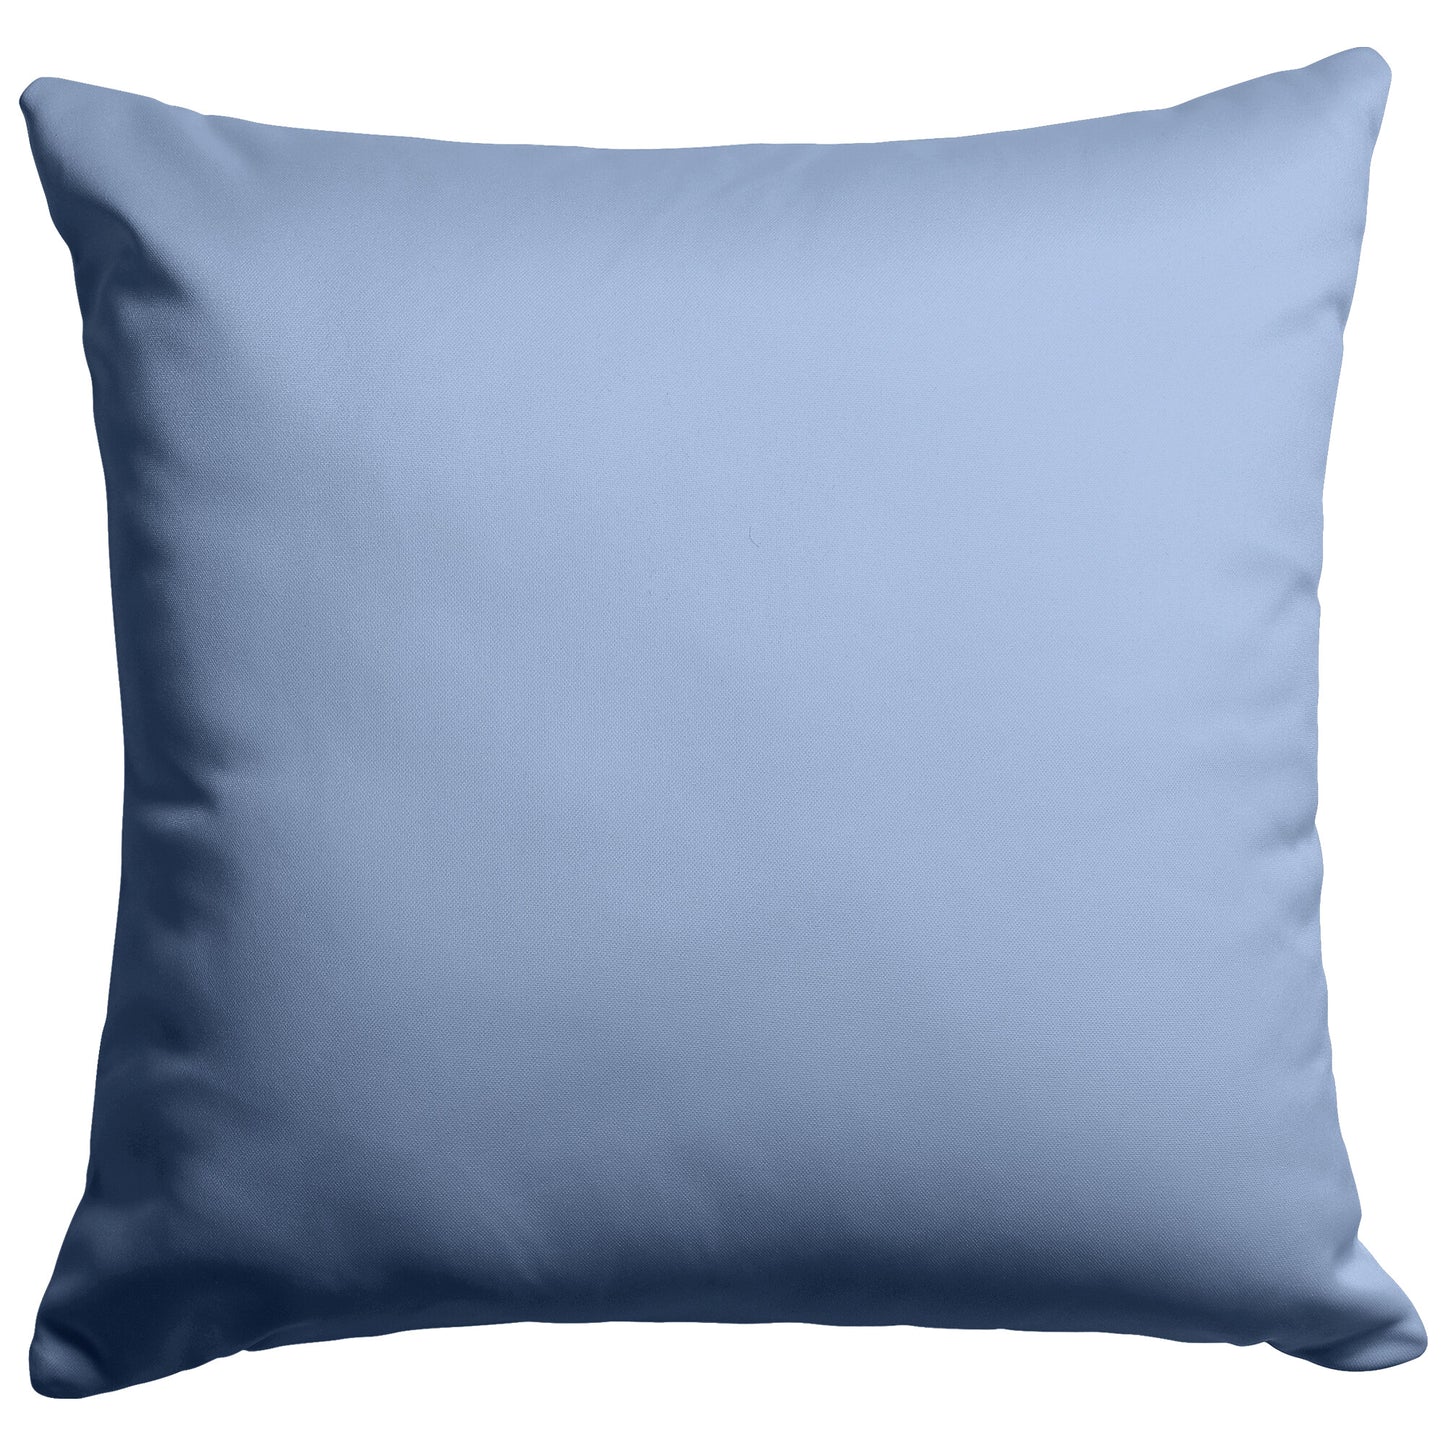 I Love Christmas! Pillow With Medium Blue Accent - Signs and Seasons Gifts